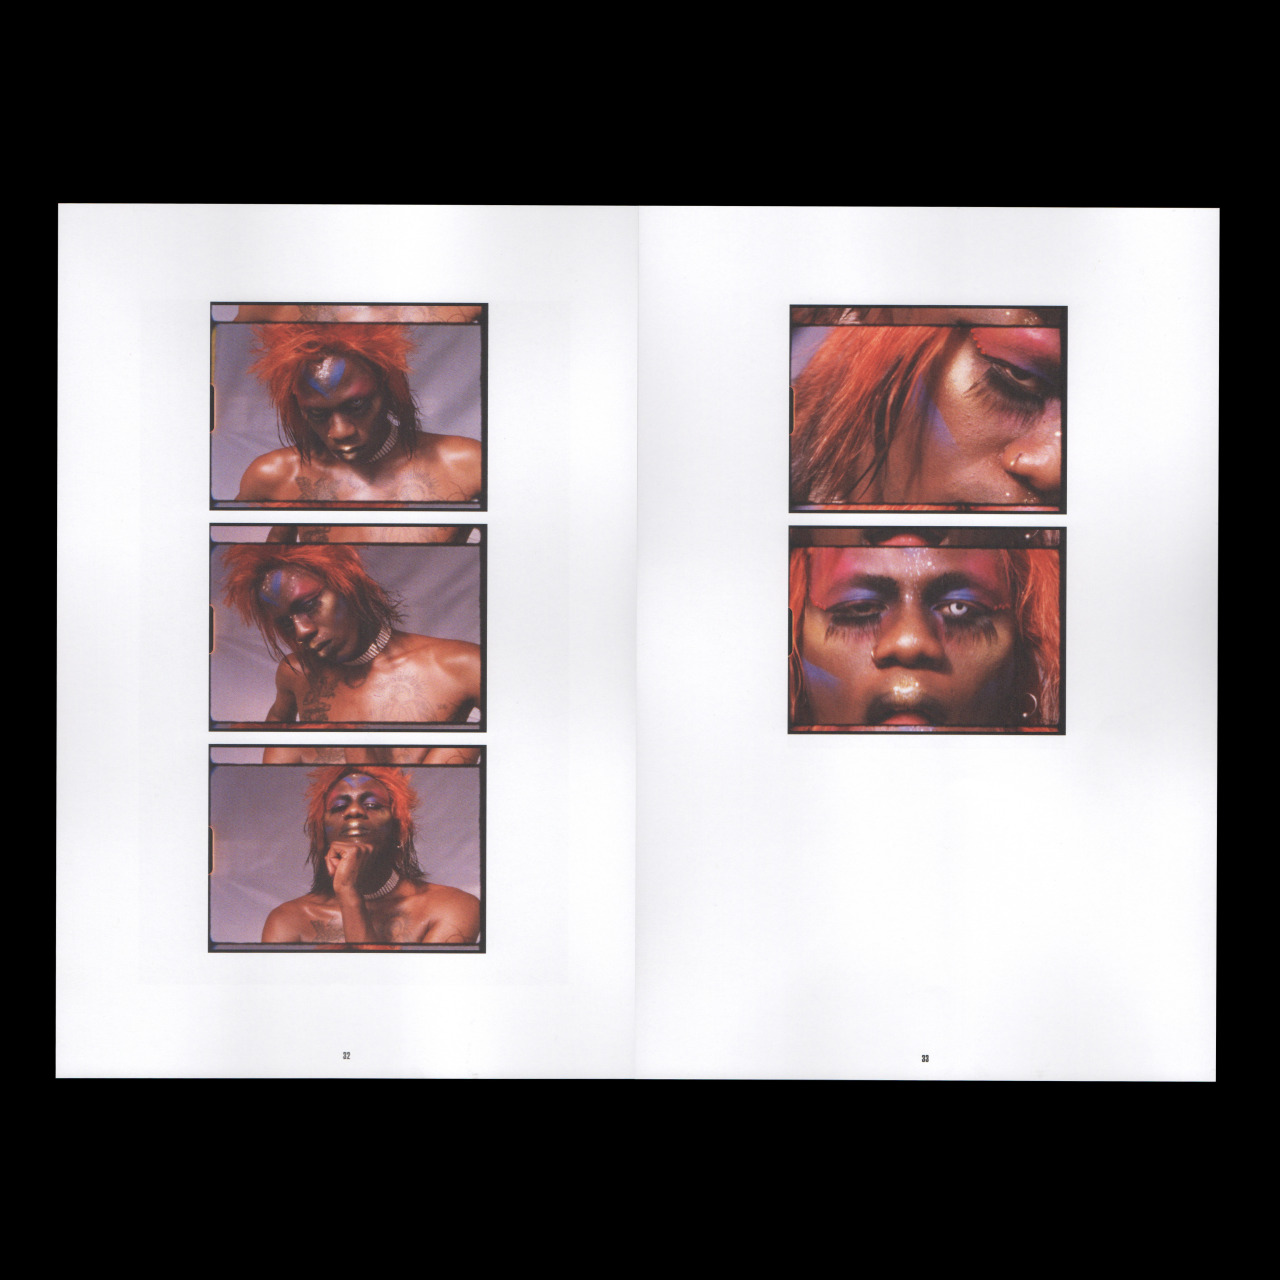 Yves Tumor - “Safe in the Hands of Love”
Limited Edition Art Book, available exclusively at LAABF 2019
Photography by Jordan Hemingway